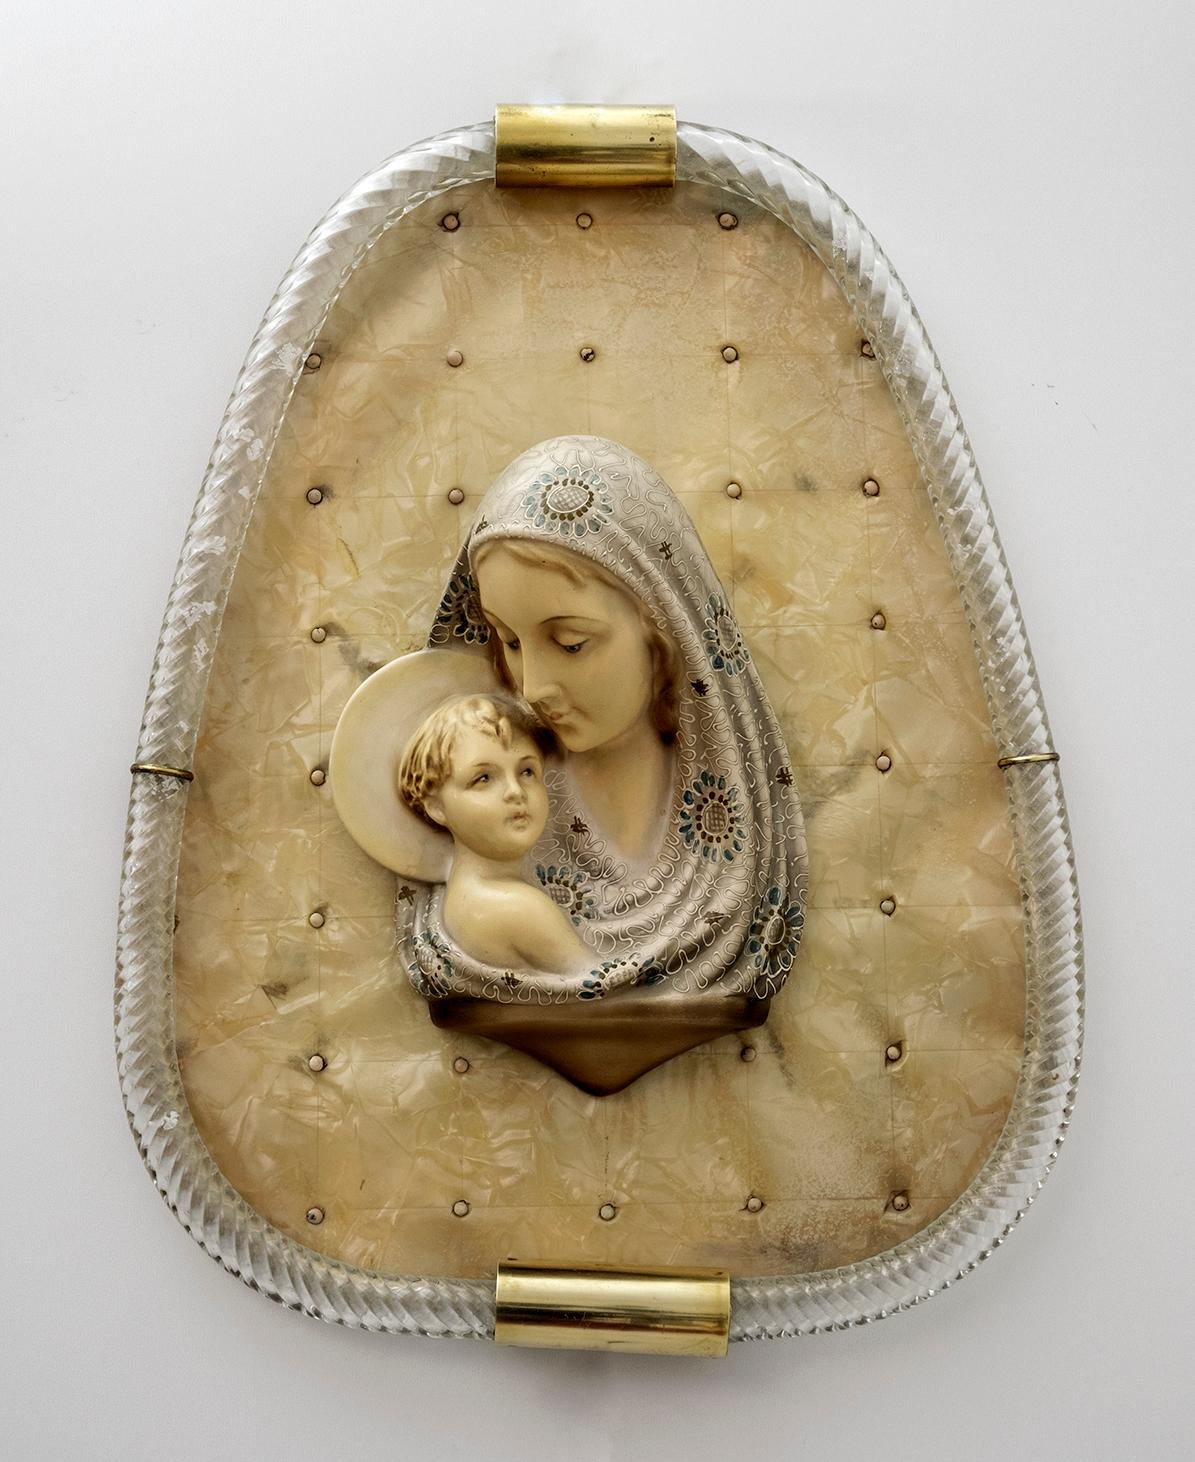 Murano glass torchon frame Venini production, inside Madonna with child in plaster on a xylonite base, dating back to the early 1950s.
Patented Model.